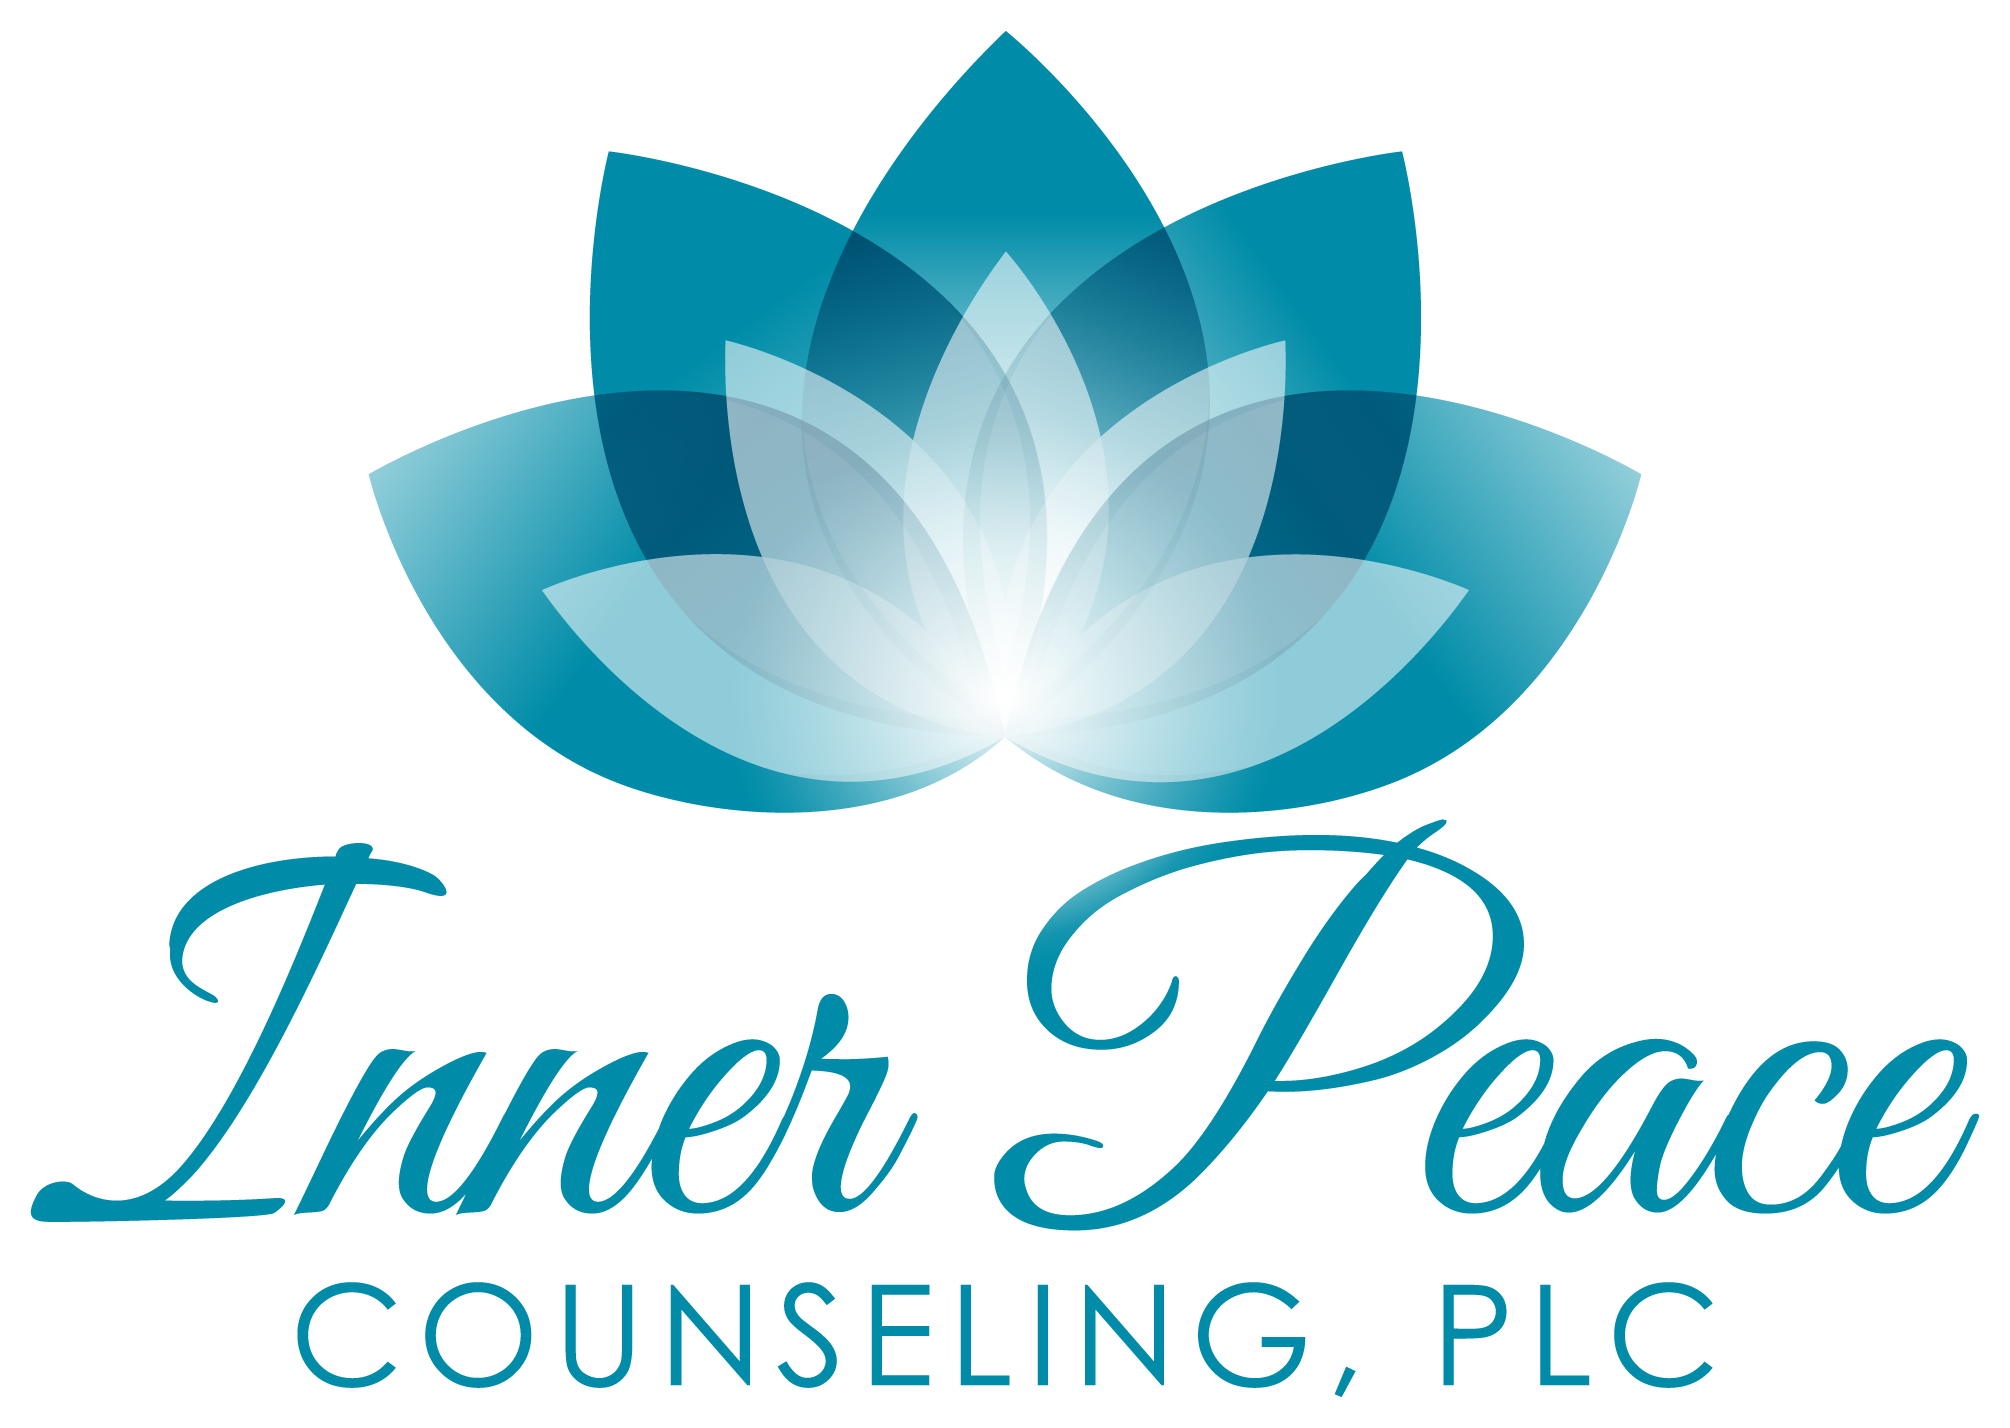 Offering a holistic approach to individual therapy, couples counseling, and life coaching in Kalamazoo and throughout Michigan.